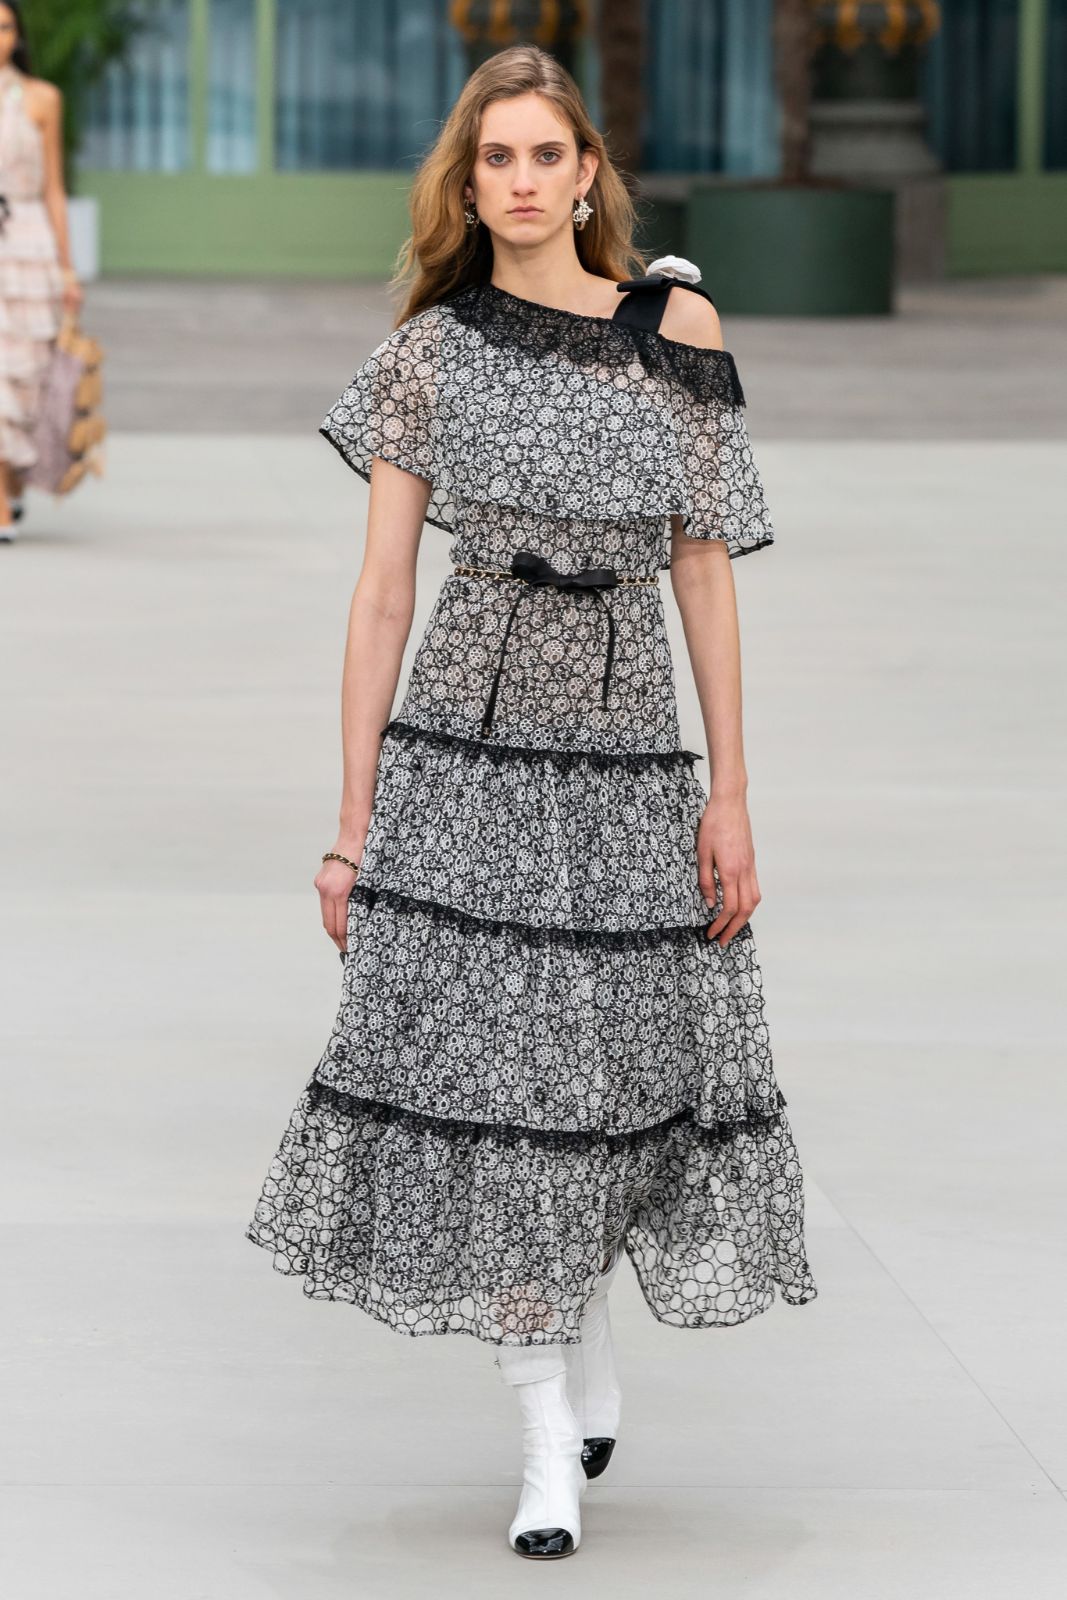 Chanel Cruise Collection 2020